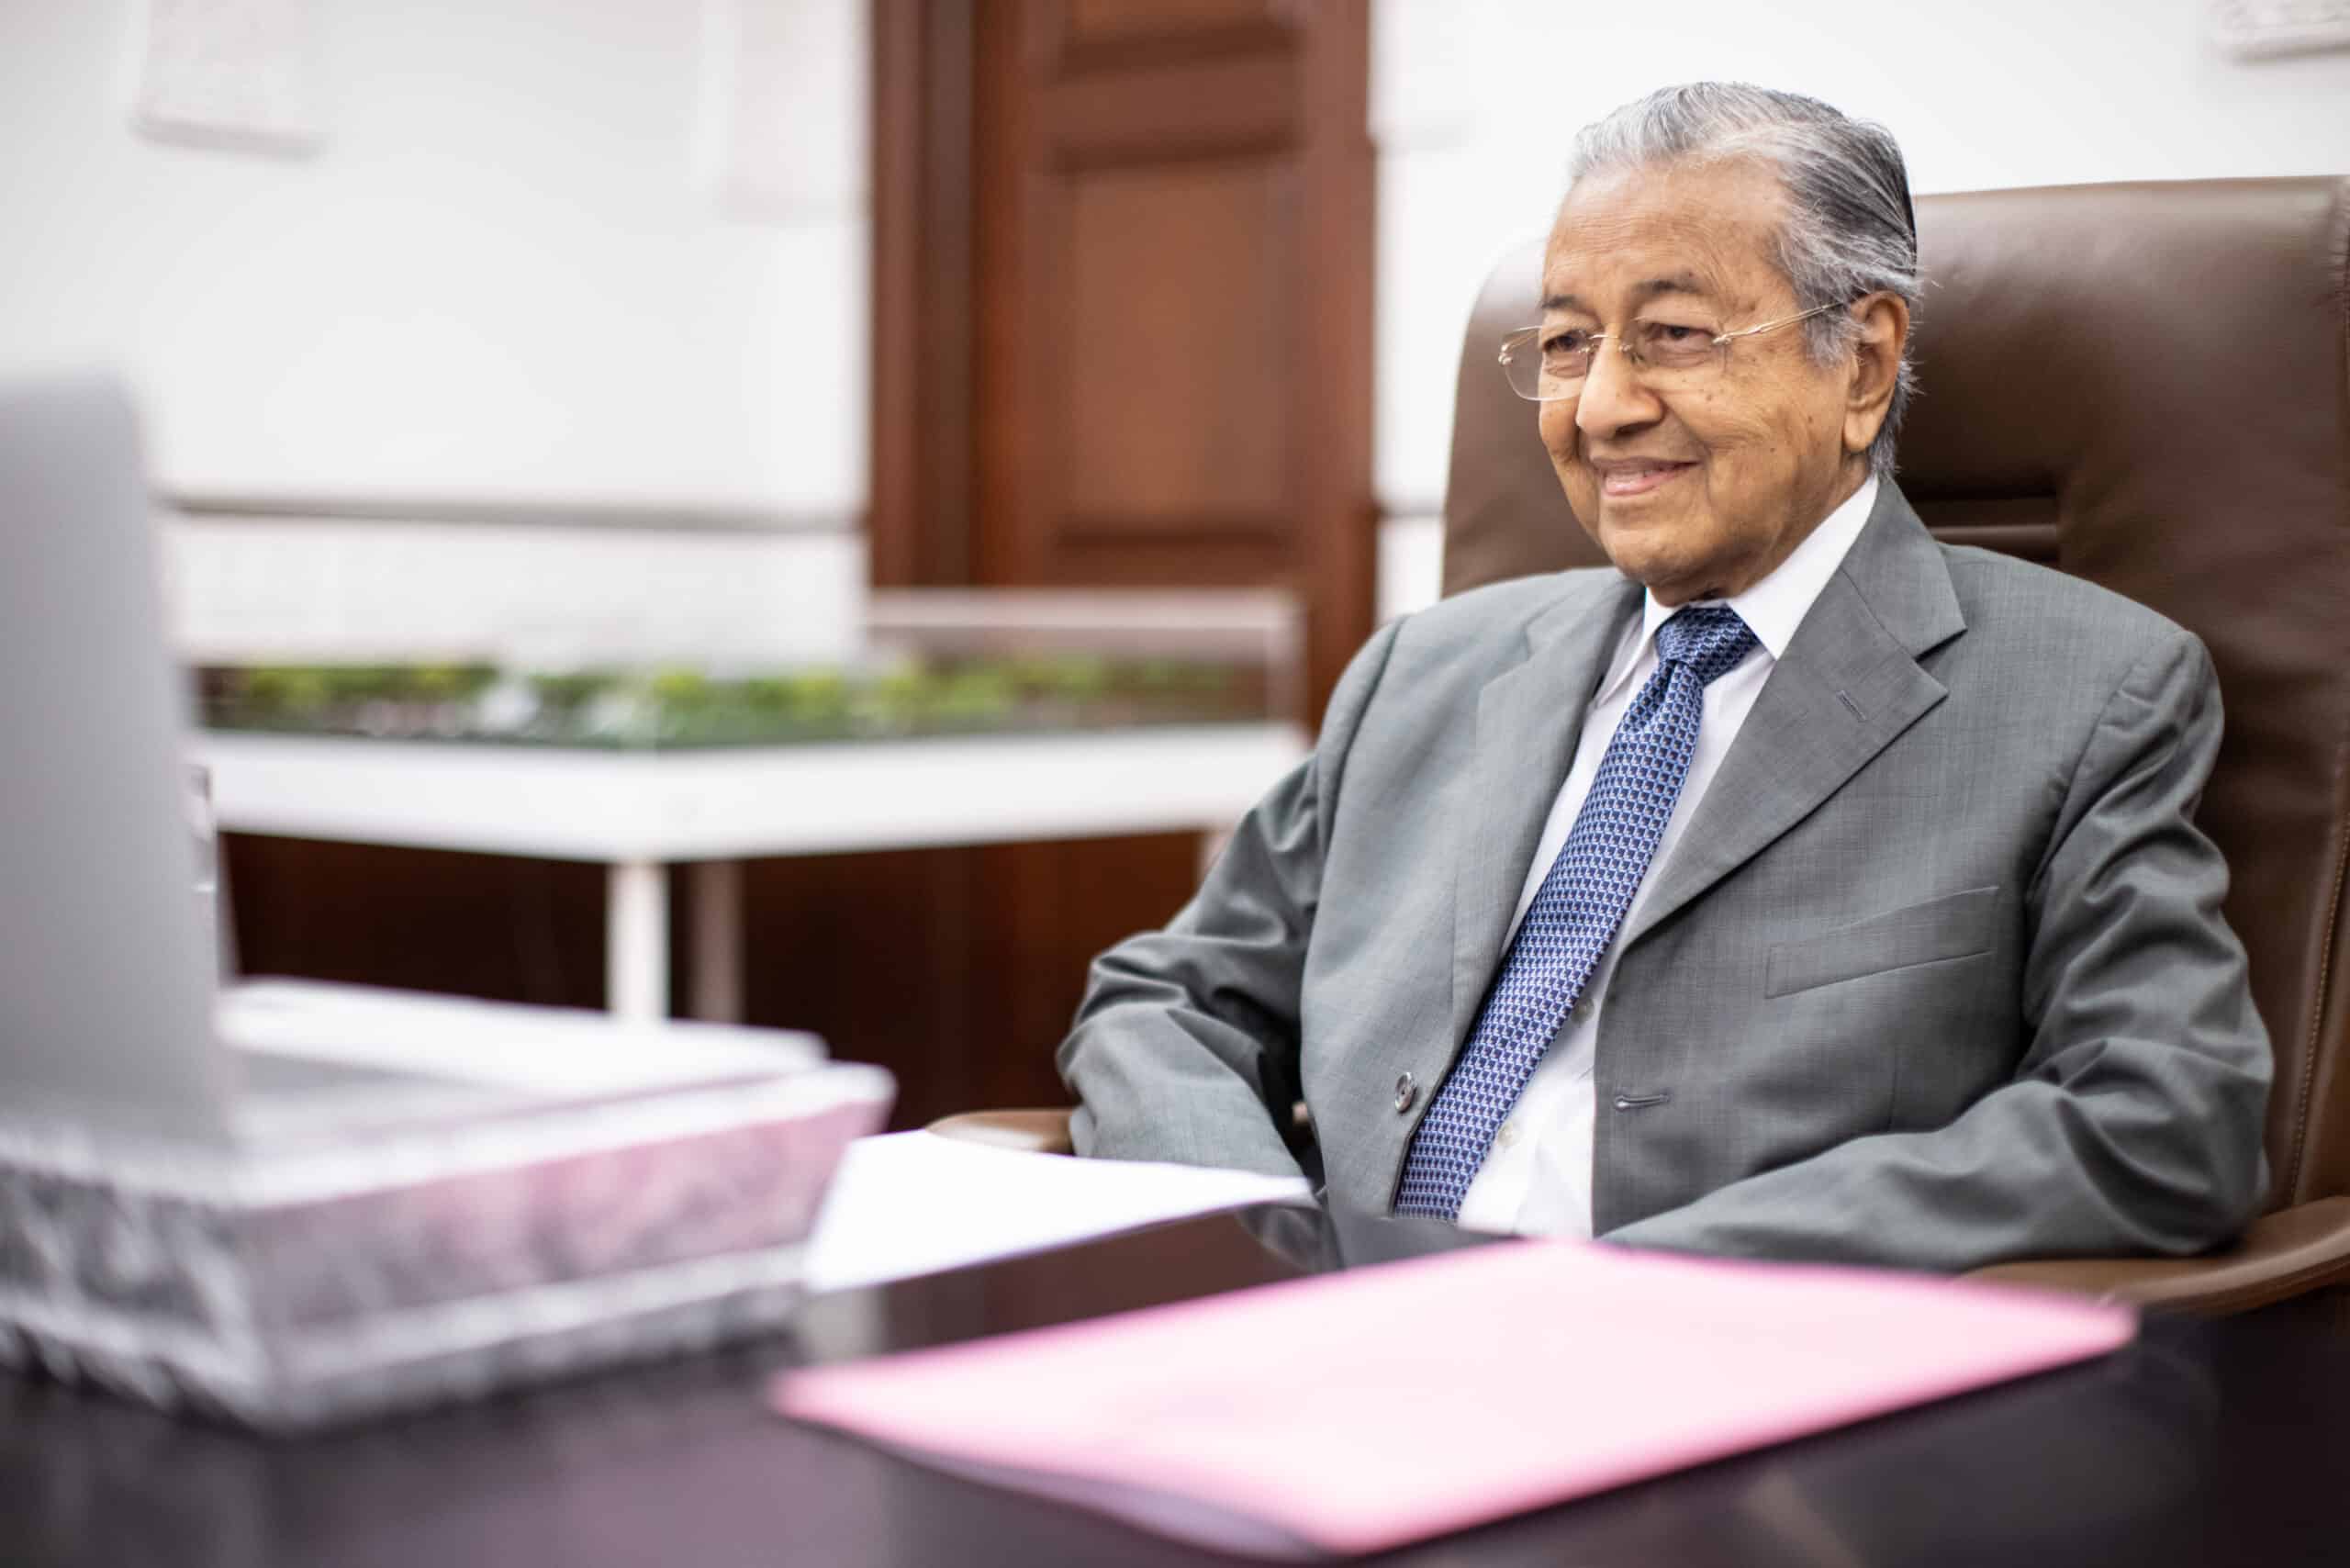 Tun Dr. Mahathir: More Time Must Be Spent On Developing The Character Of Students